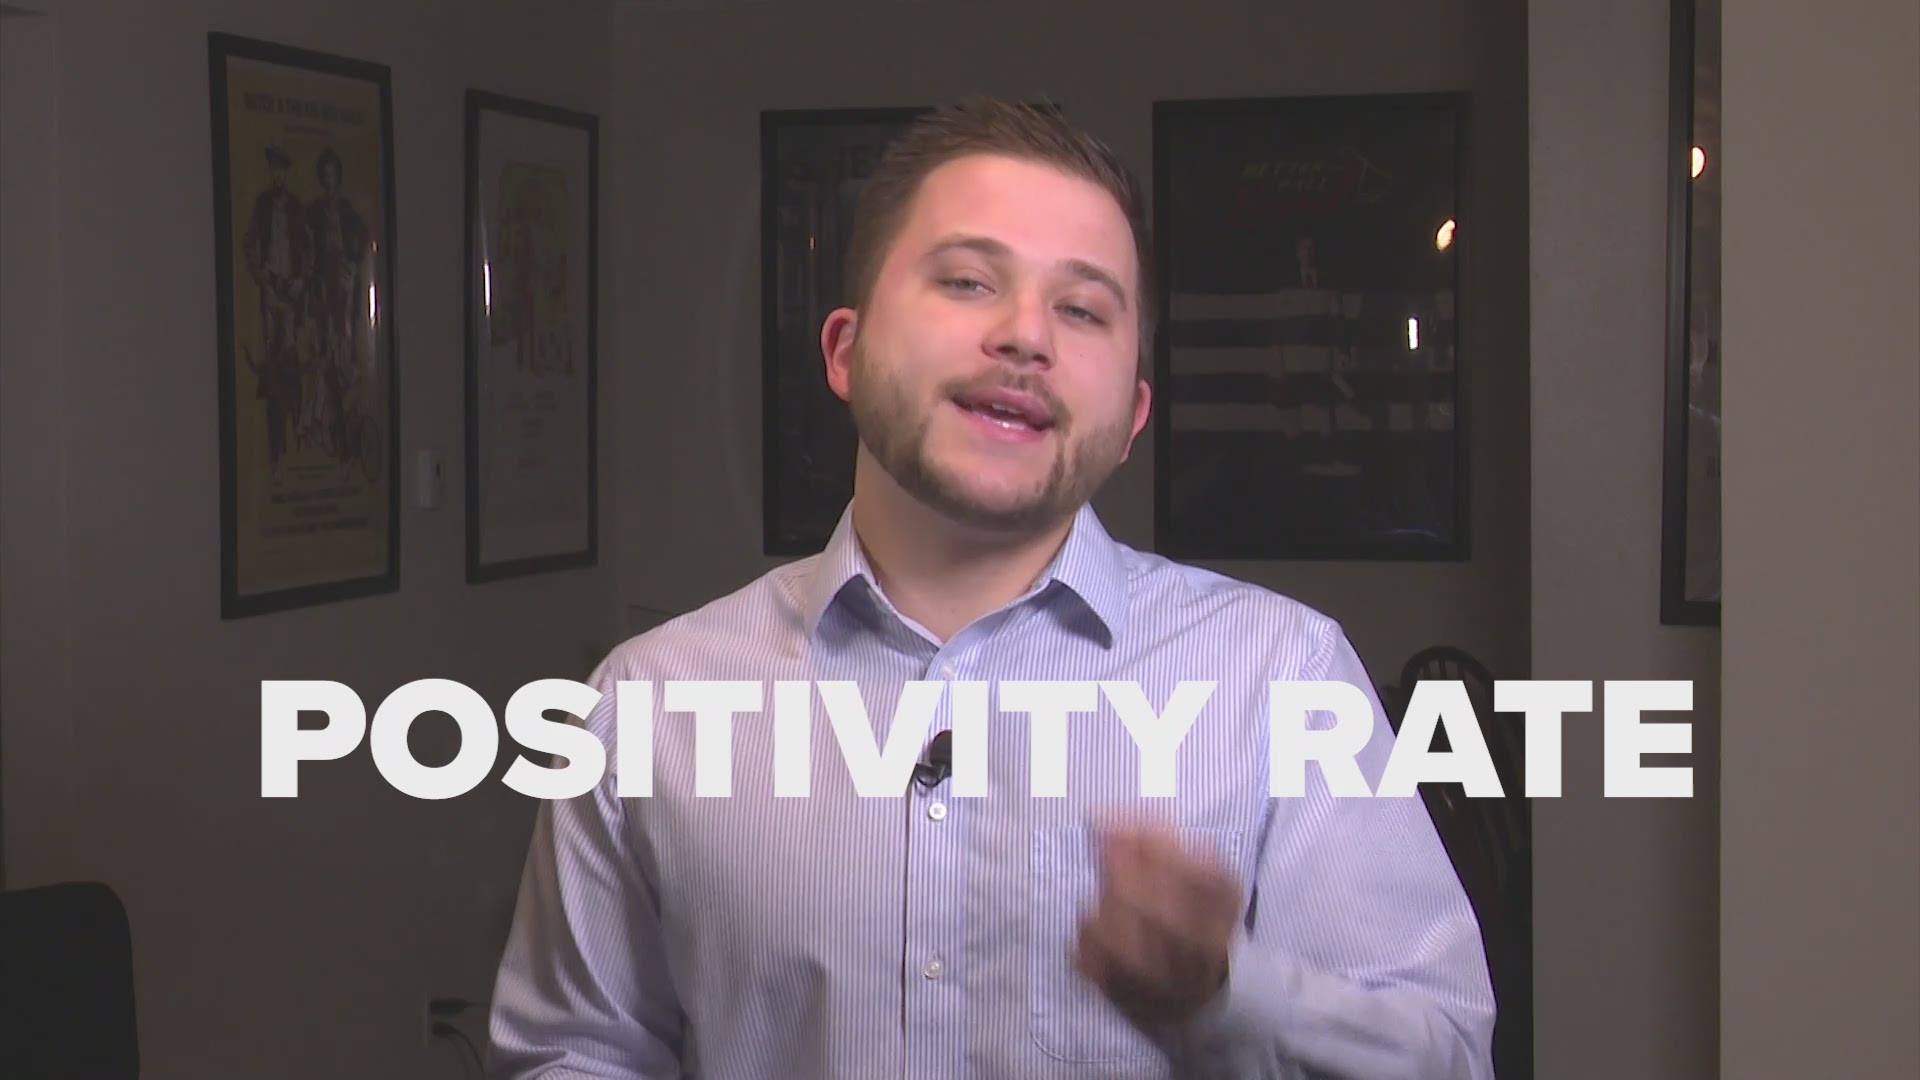 Wise, Cooke, Johnson and Grayson counties have all hit record-highs in both positivity rate and the 7-day average positivity rate in the past two weeks.